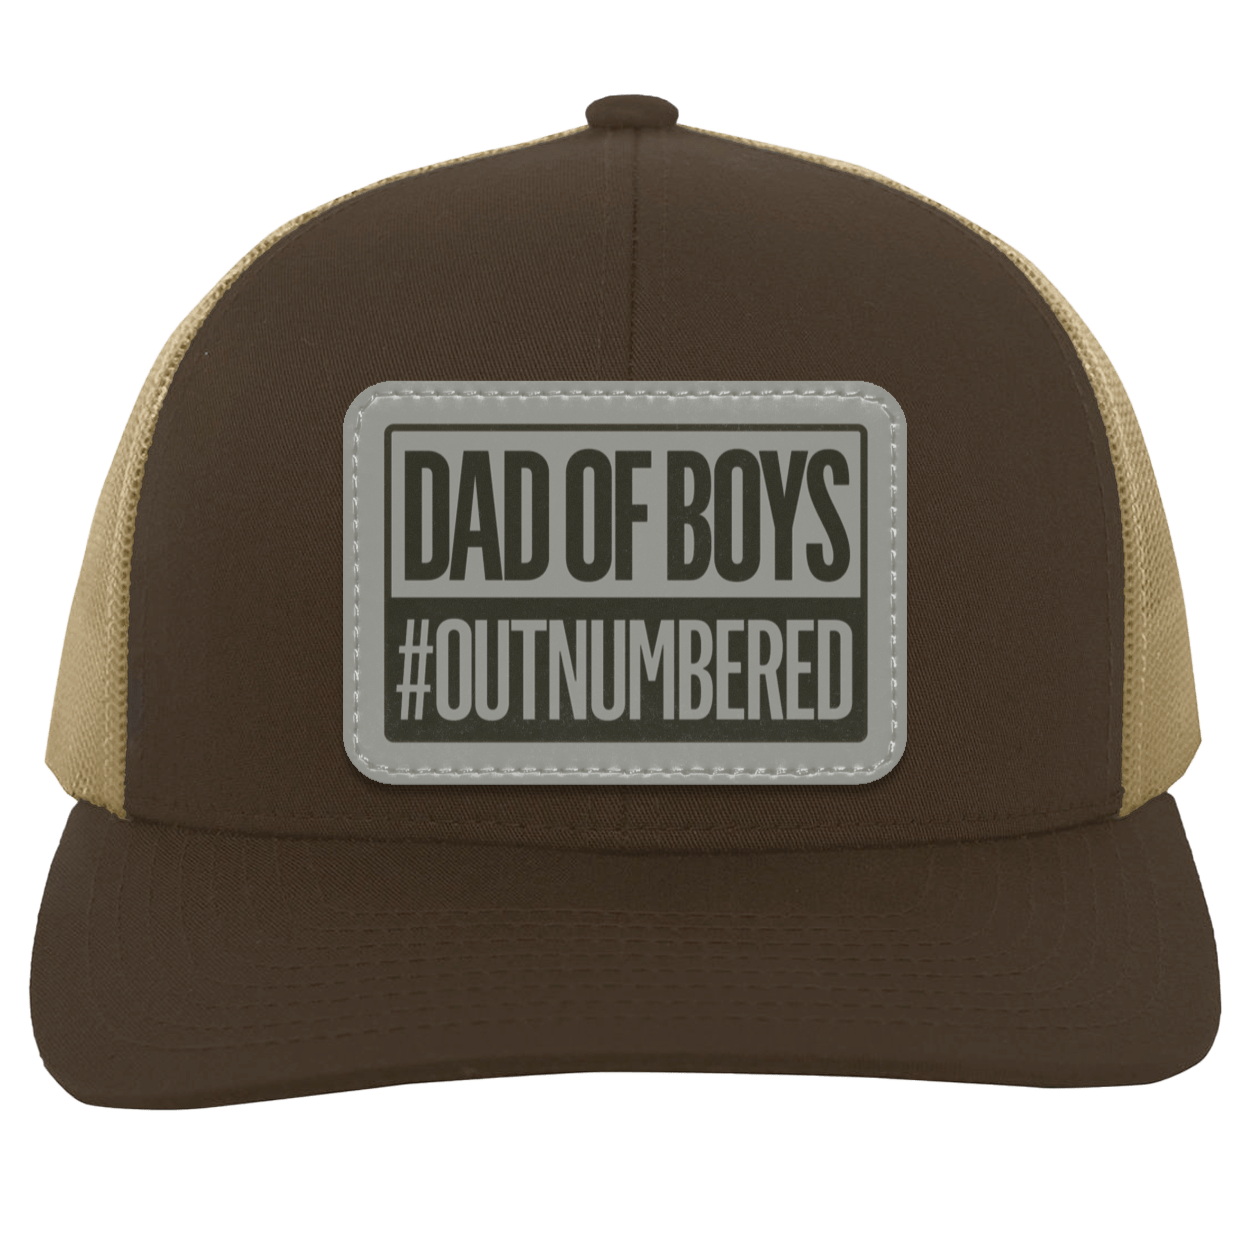 Dad of Girls/Boys Outnumbered Leather Patch Hat Gift